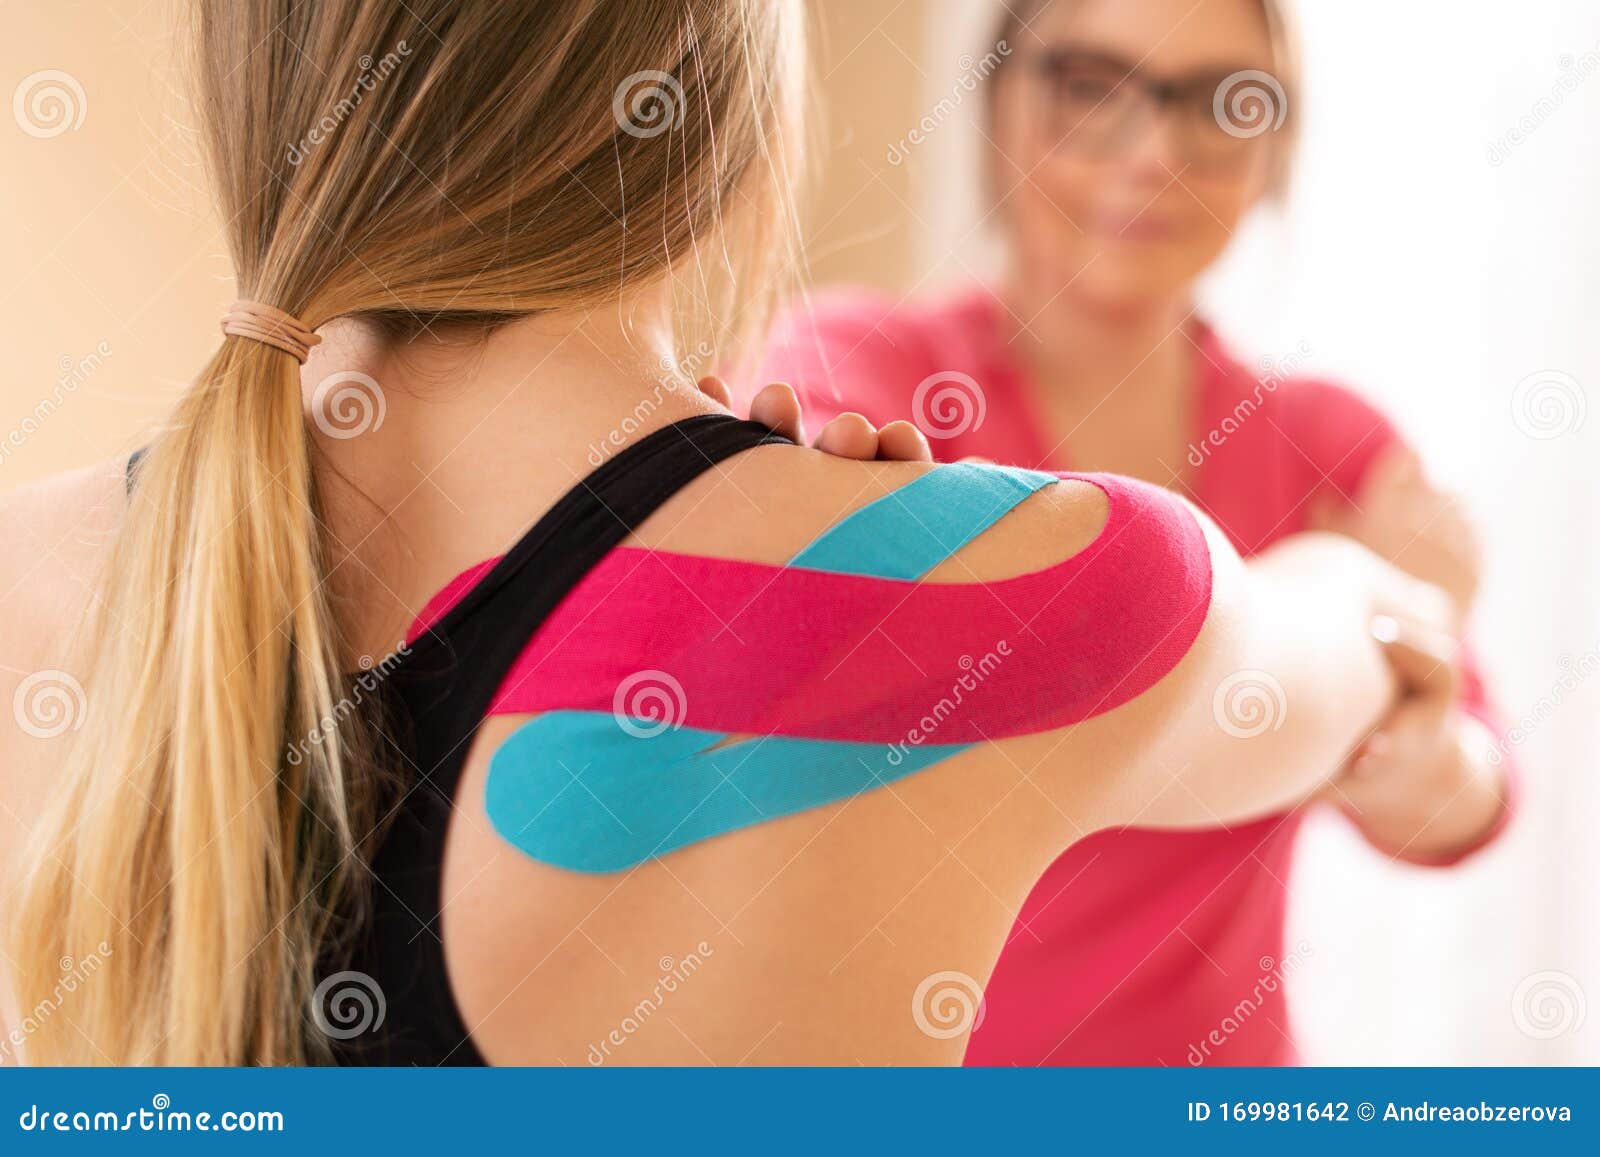 young female patient wearing kinesio tape on her shoulder exercising with a professional physical therapist. kinesiology.